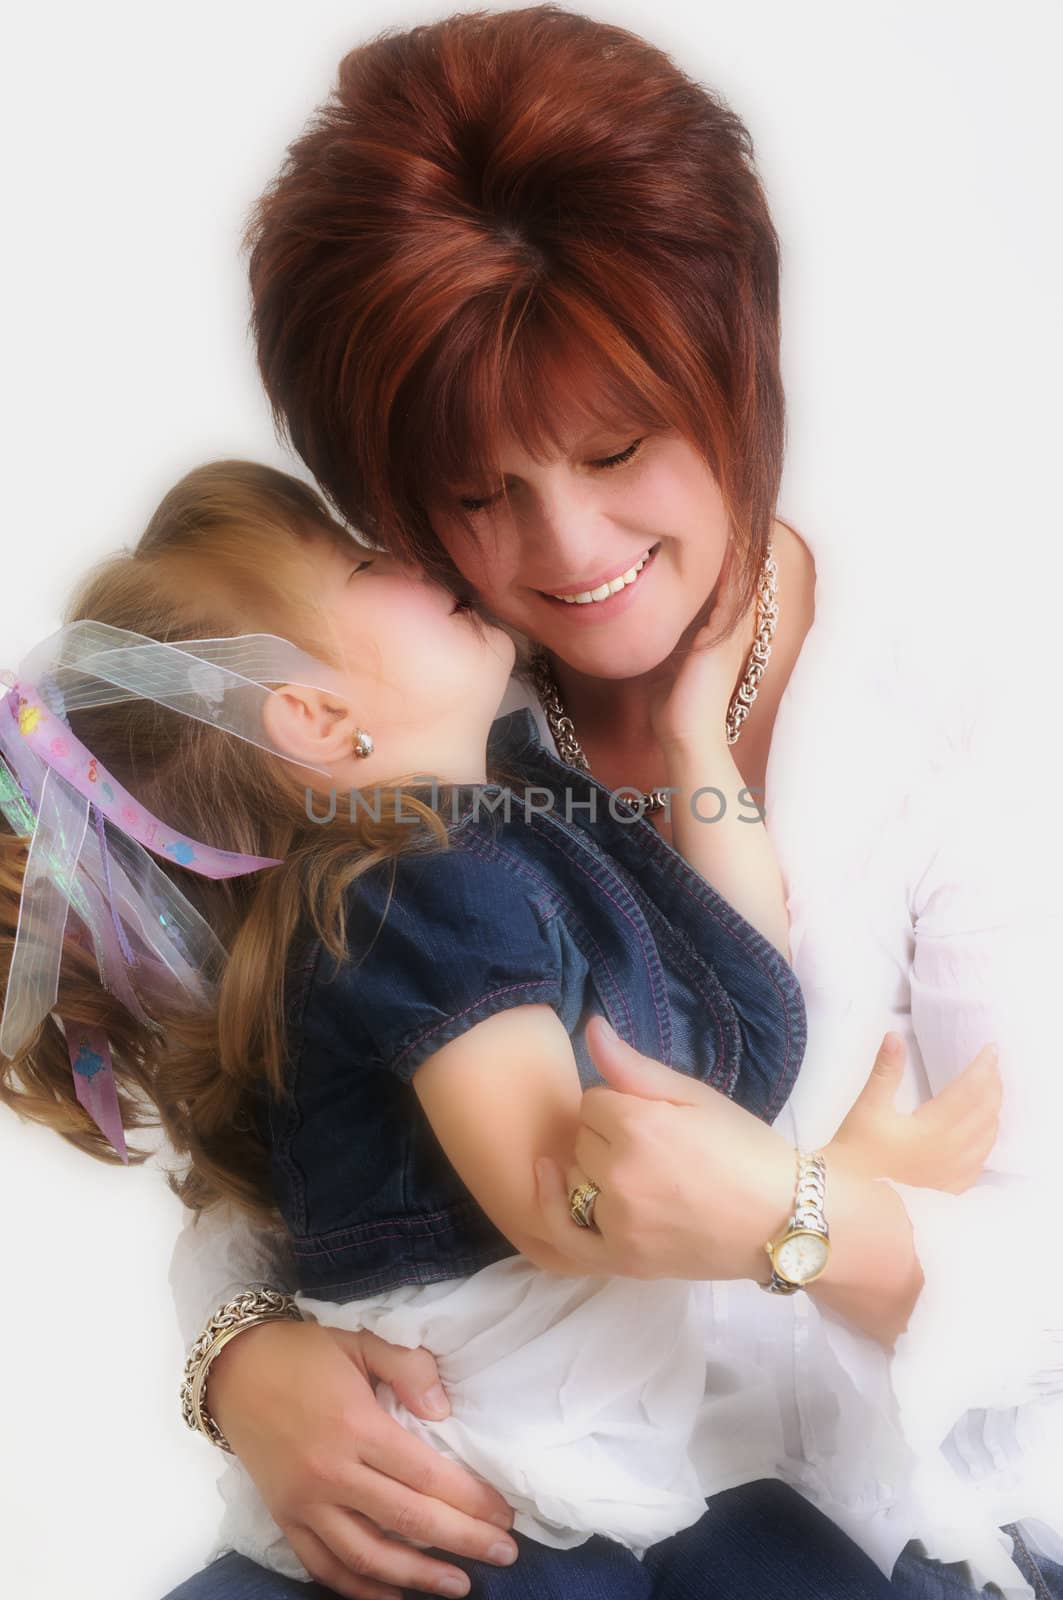 mother and daughter kissing and smiling by Ansunette